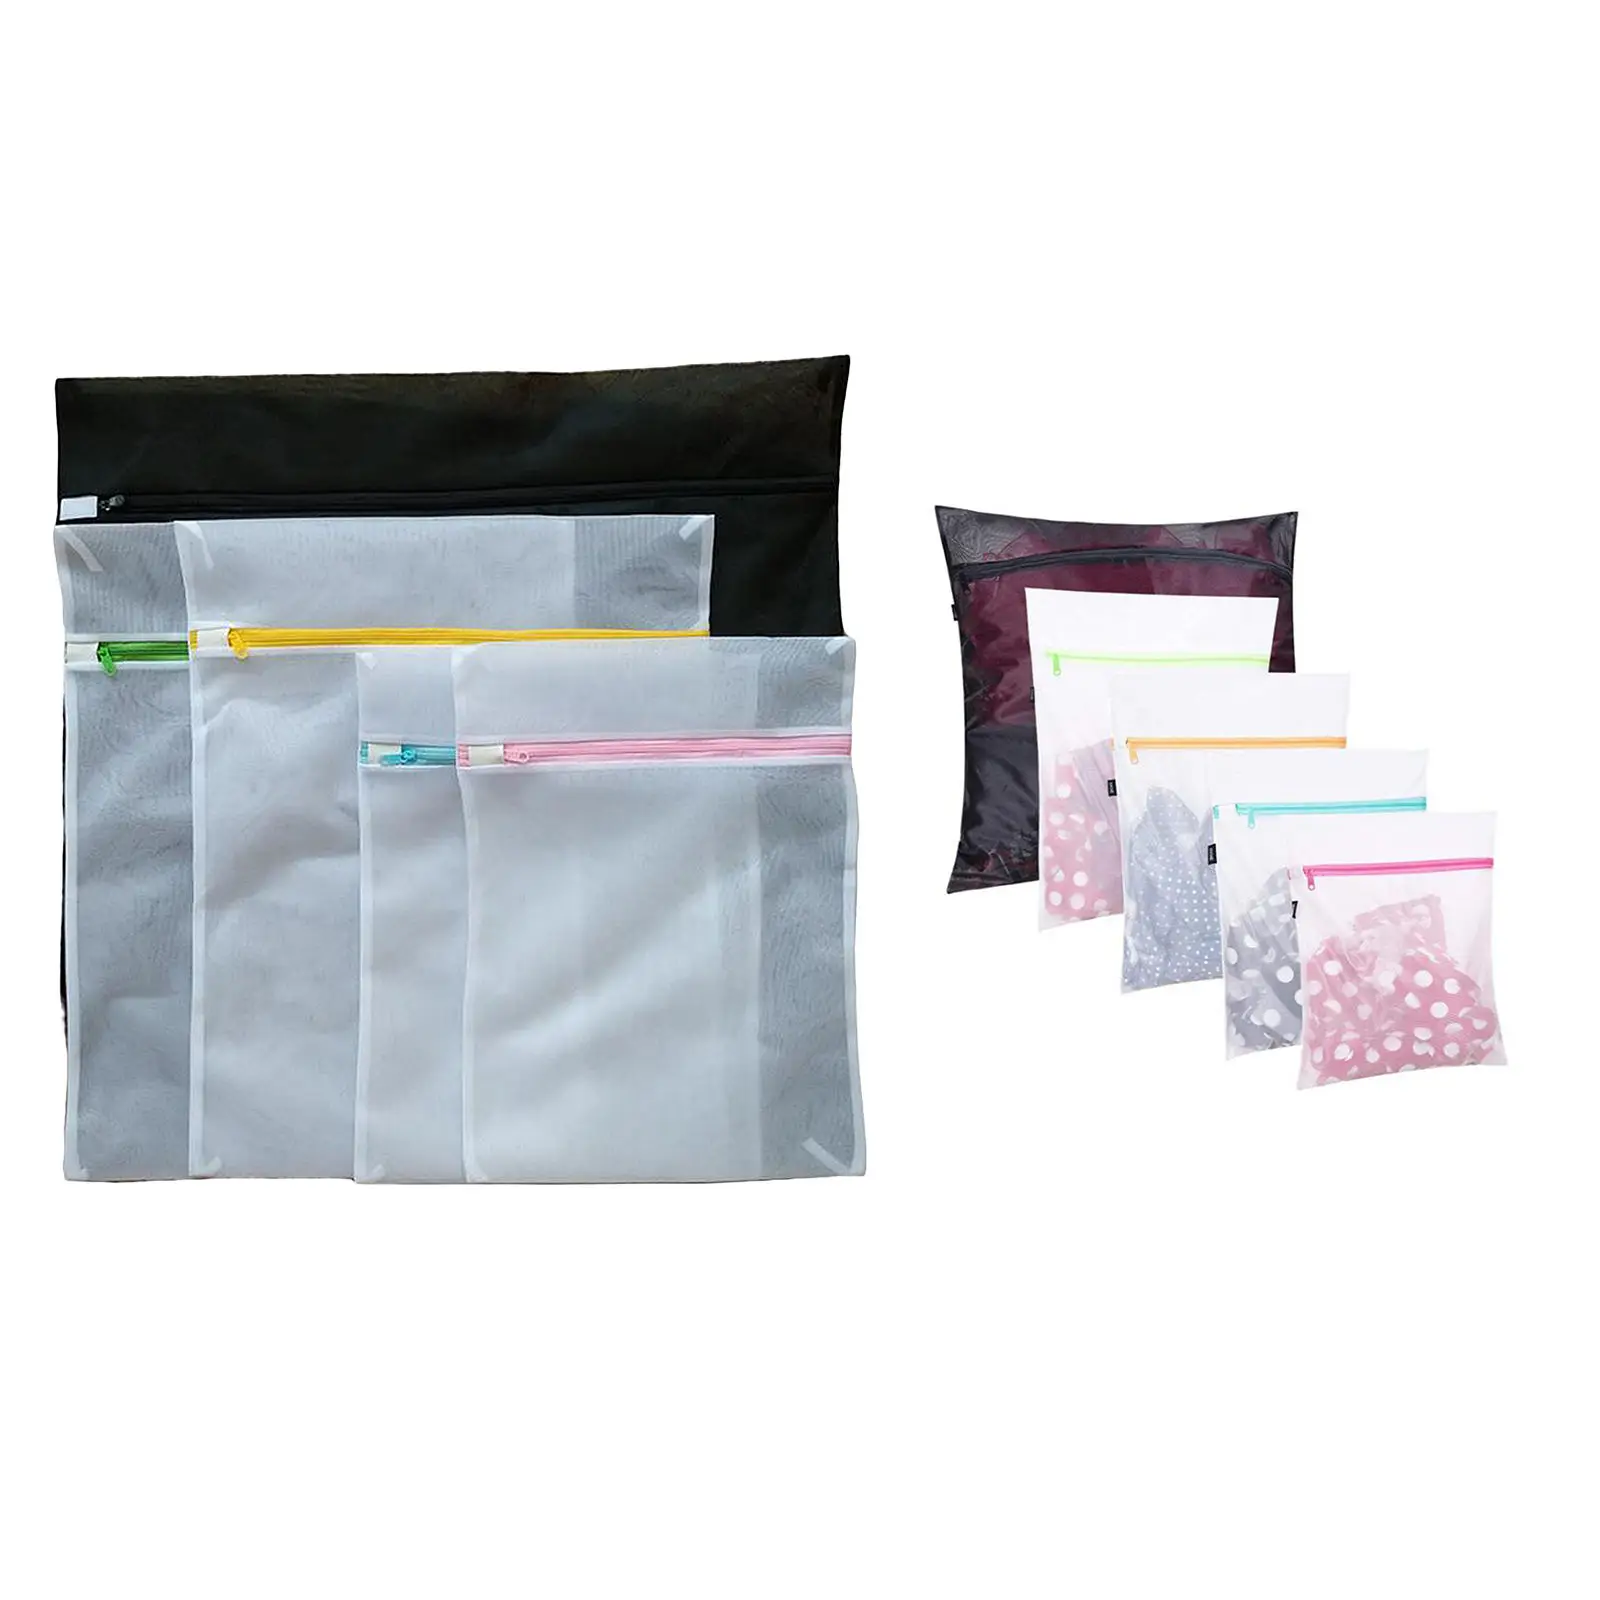 5Pieces Mesh Laundry Bags for Delicates Travel Storage Organize Bag, Clothing Washing Bags for Travel Outdoor